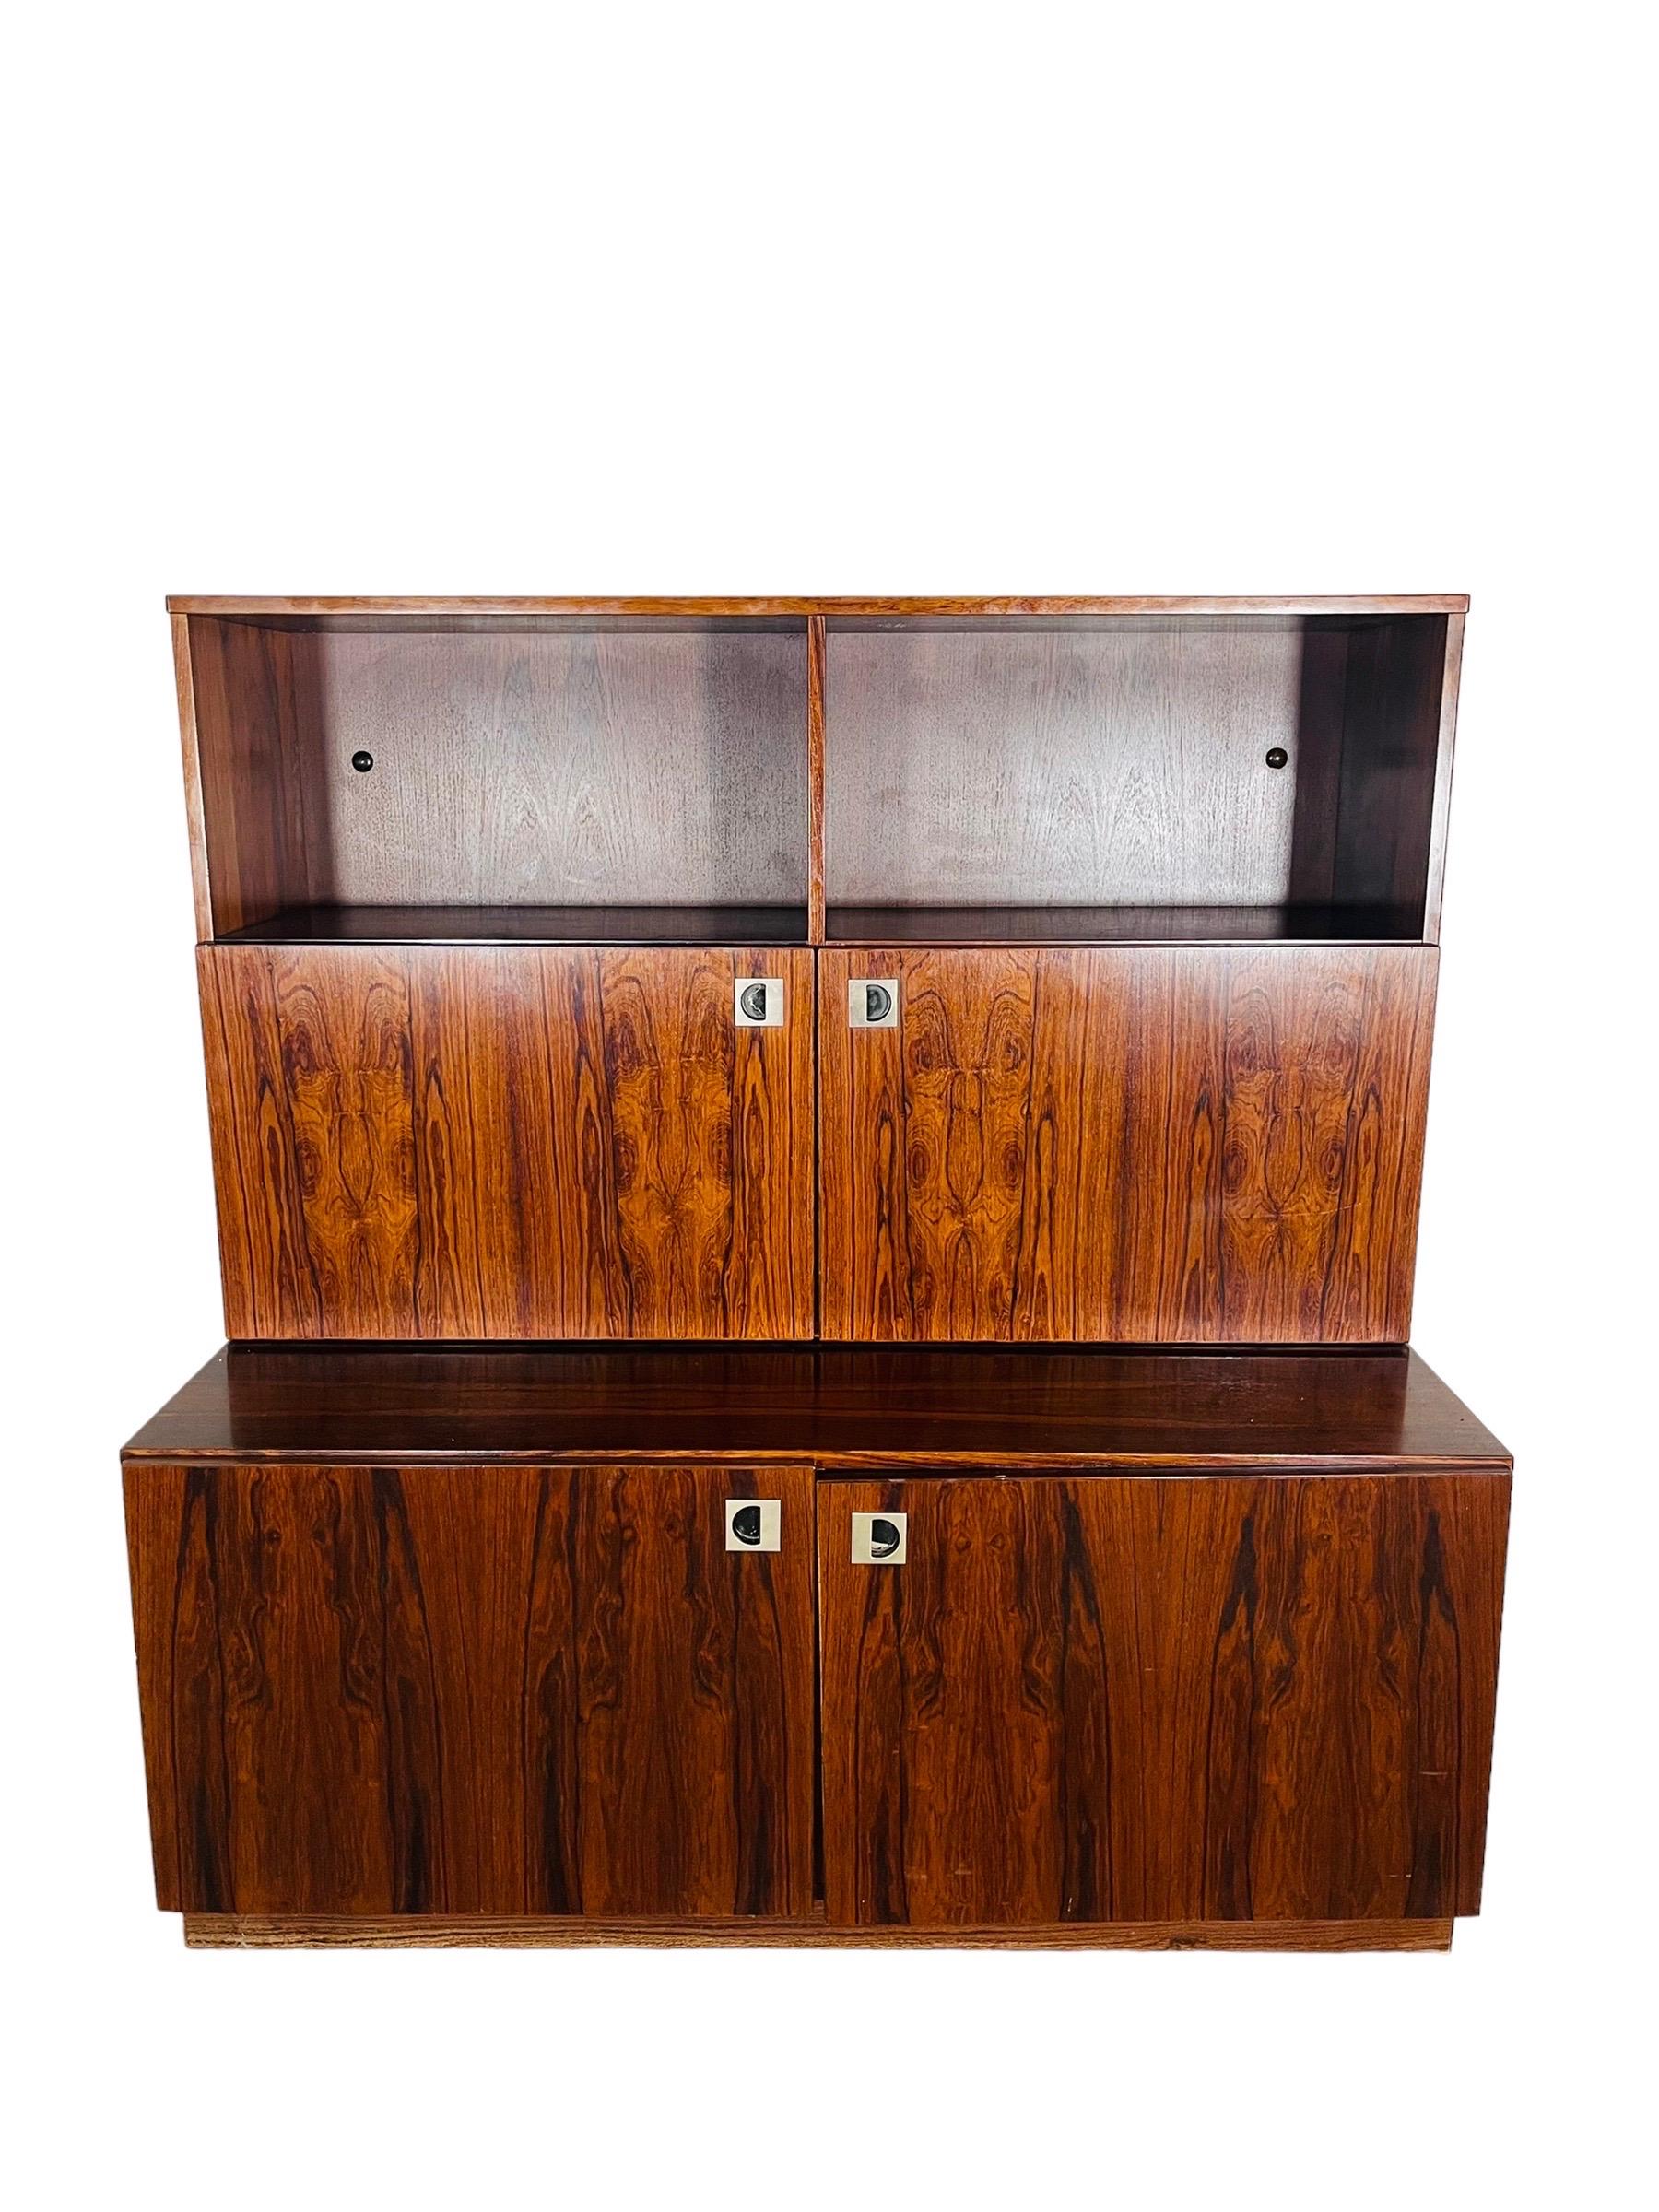 Beautiful Danish Modern rosewood bar cabinet by Hammel Mobelfabrik. This beautiful rosewood piece can be used as a cabinet with plenty of storage space. Behind the right upper door there is a mirror on the back panel which a light. This piece is in